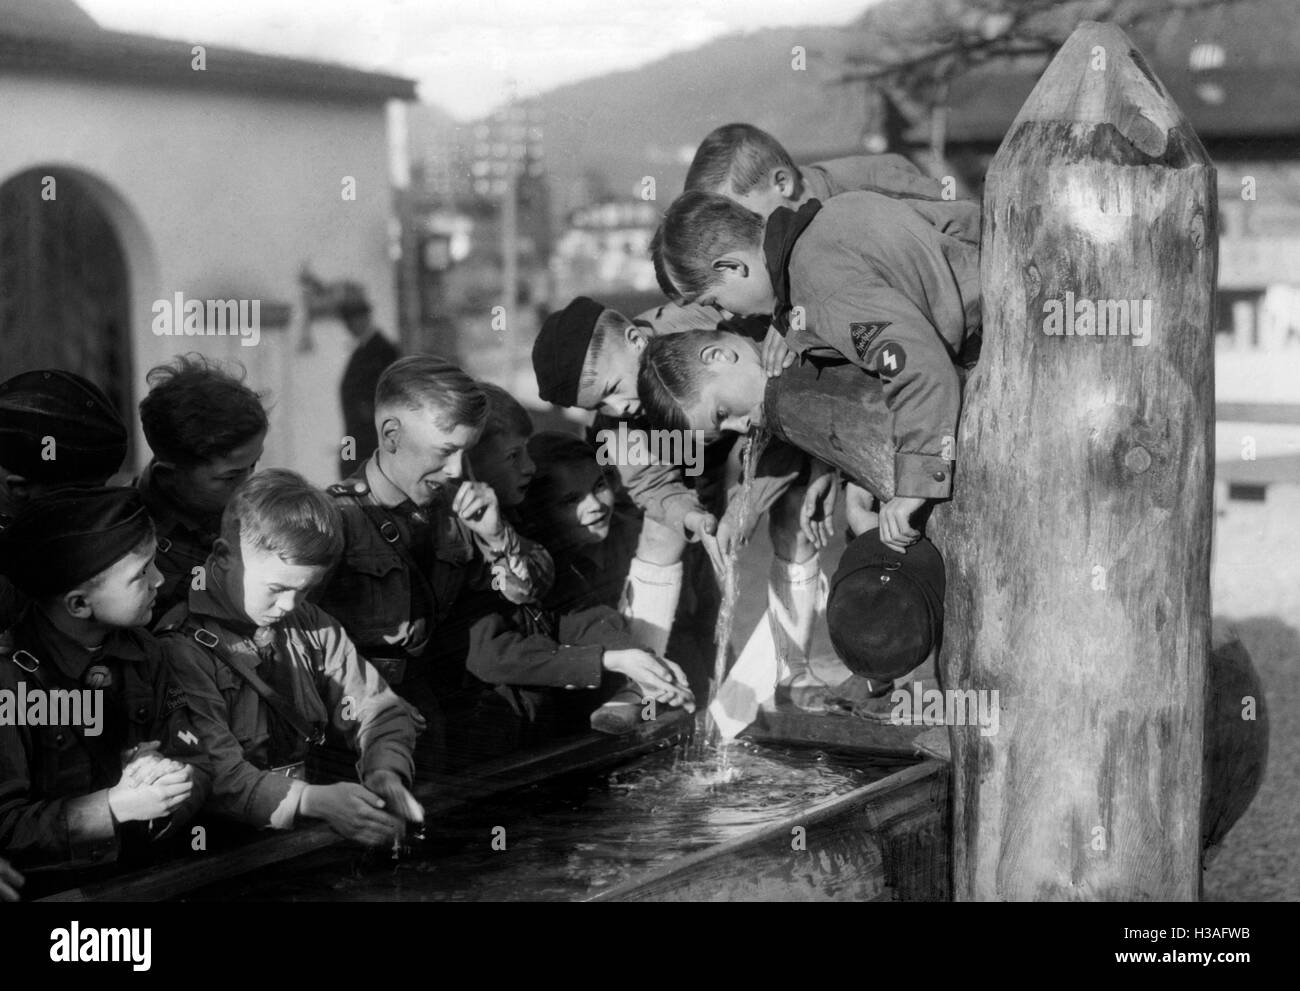 Members of the Deutsches Jungvolk drinking at the fountain, 1937 Stock Photo